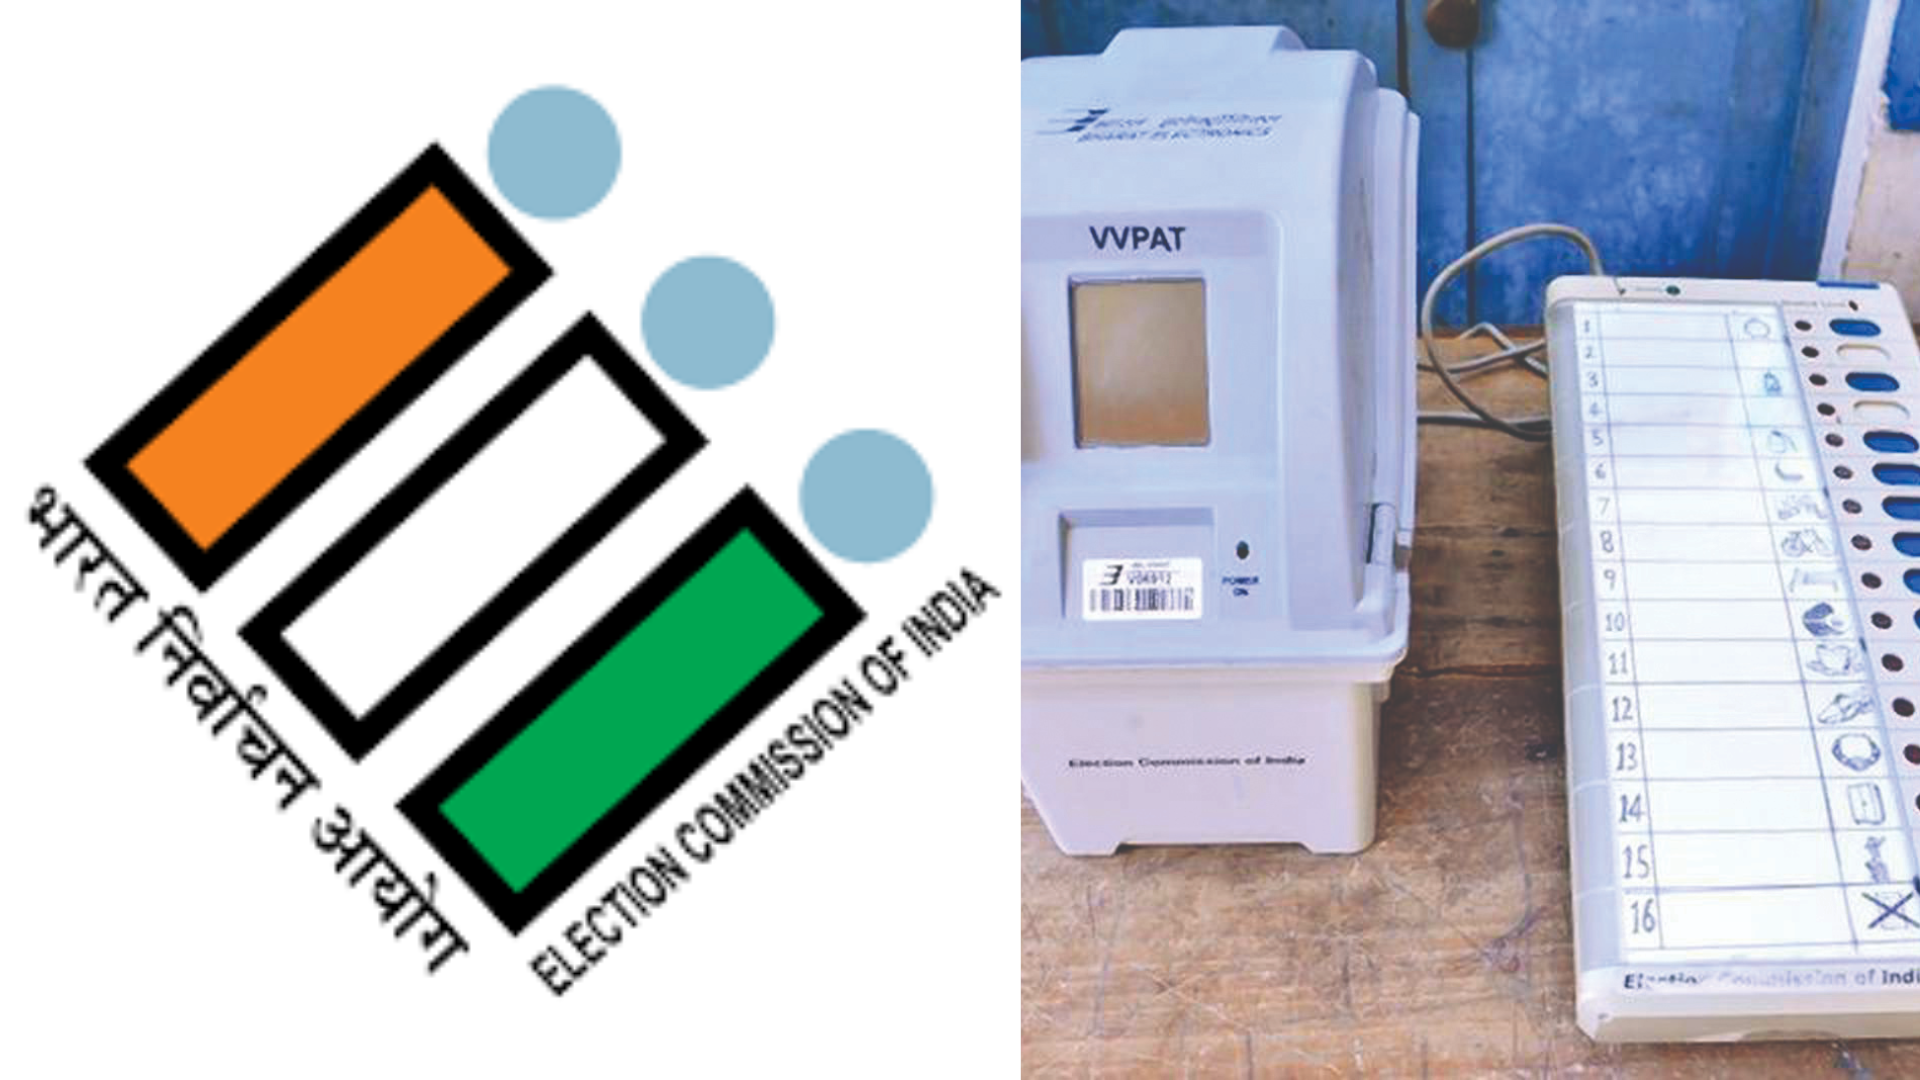 Supreme Court Issues Notice To EC On Petition For Full VVPAT Slip Count